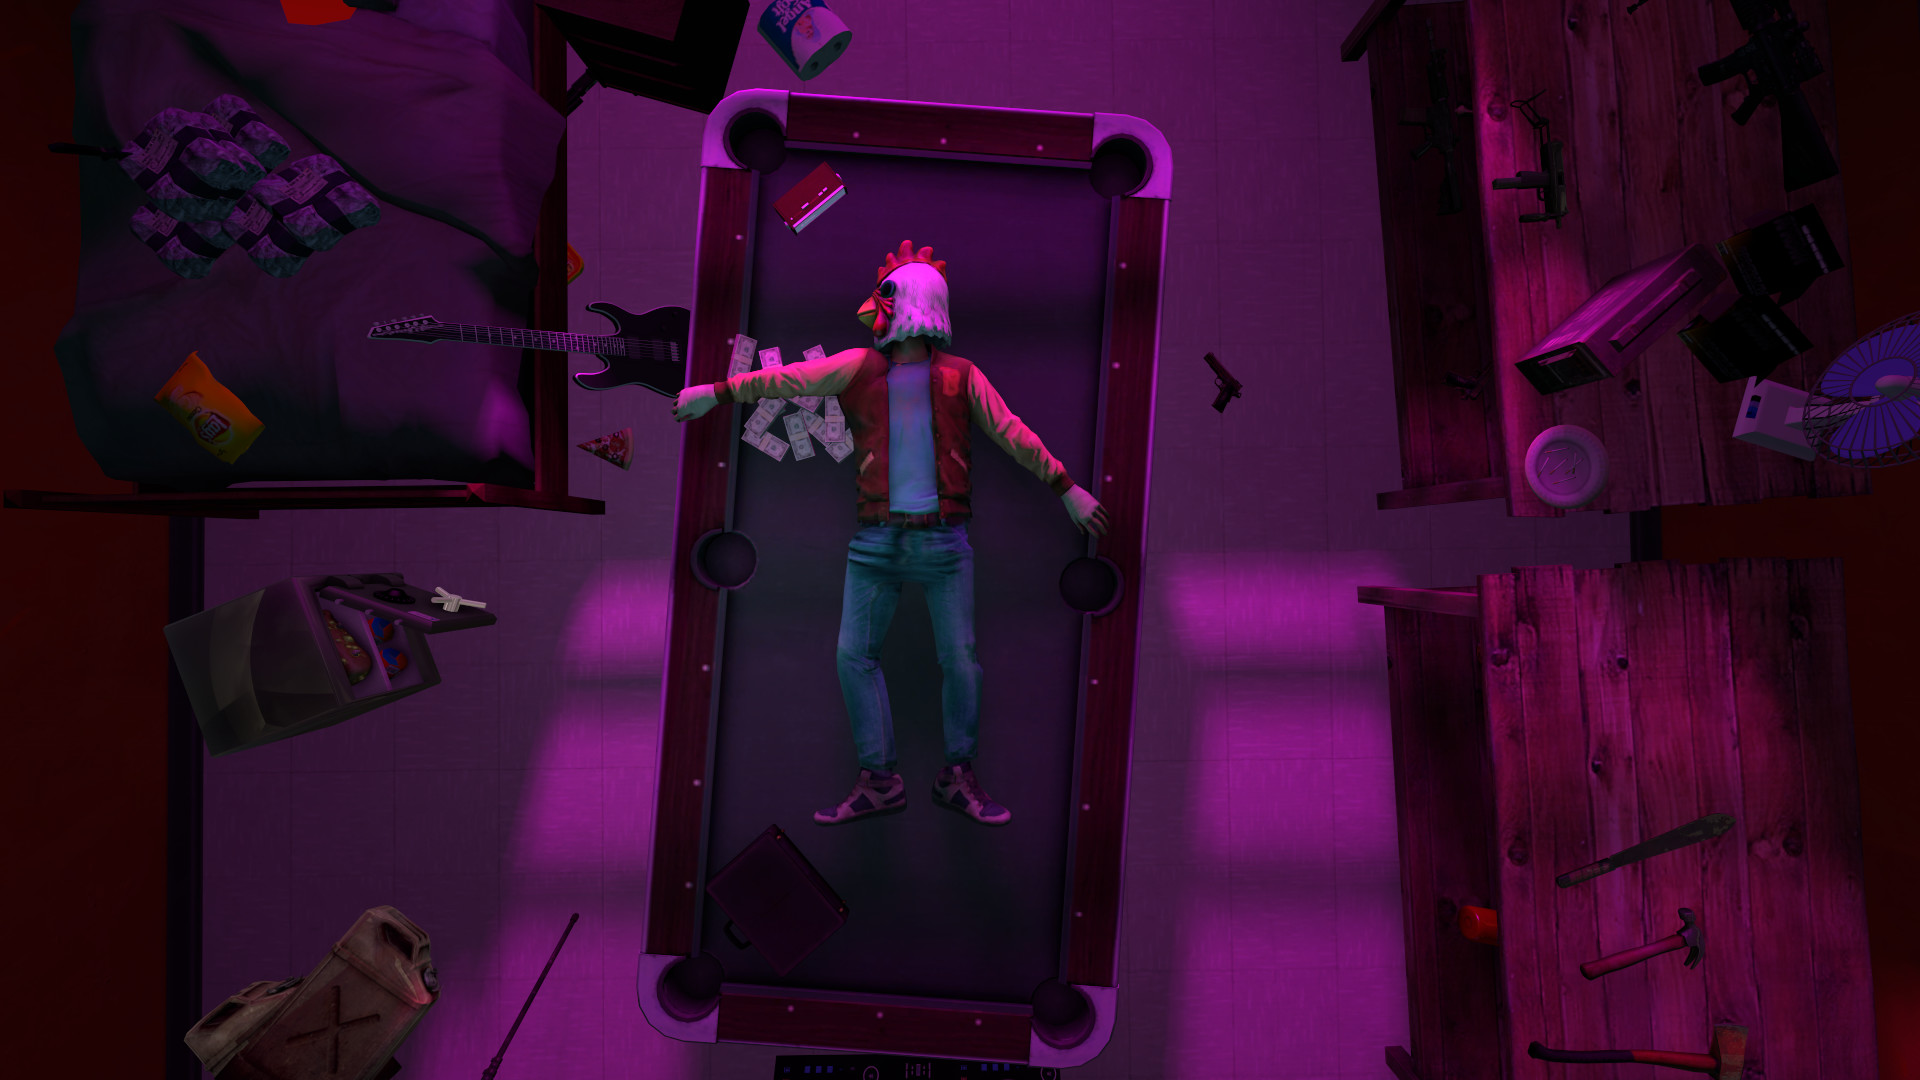 1920x1080 HotlineMiami Wallpaper Jacket Sleeping by pablito7 HotlineMiami Wallpaper  Jacket Sleeping by pablito7